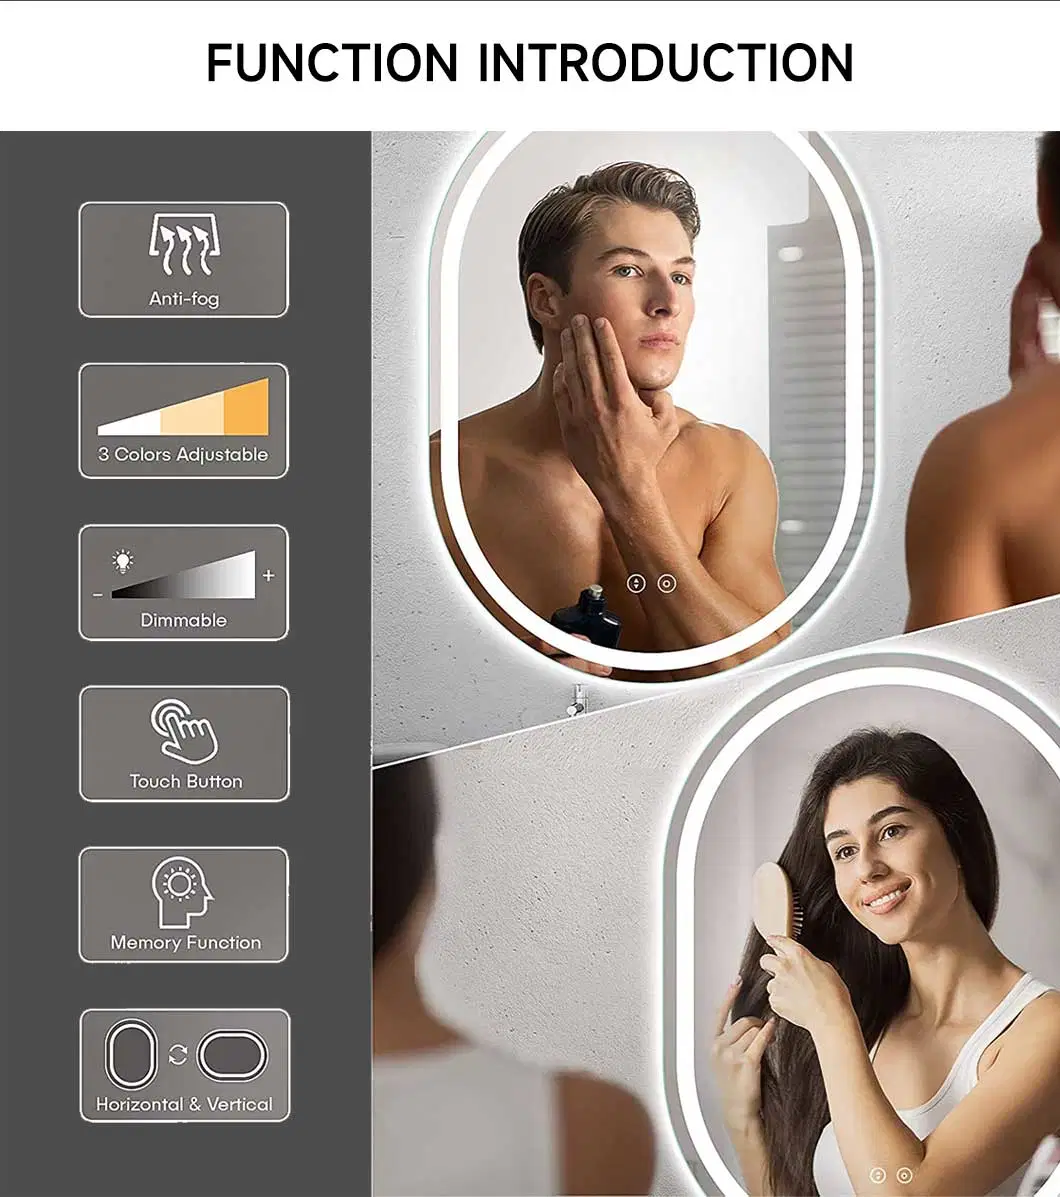 Hot Seller Rectangle Backlit Touch Screen LED Bathroom Mirror Smart LED LED Mirror Customized Furniture Mirror for Bathroom